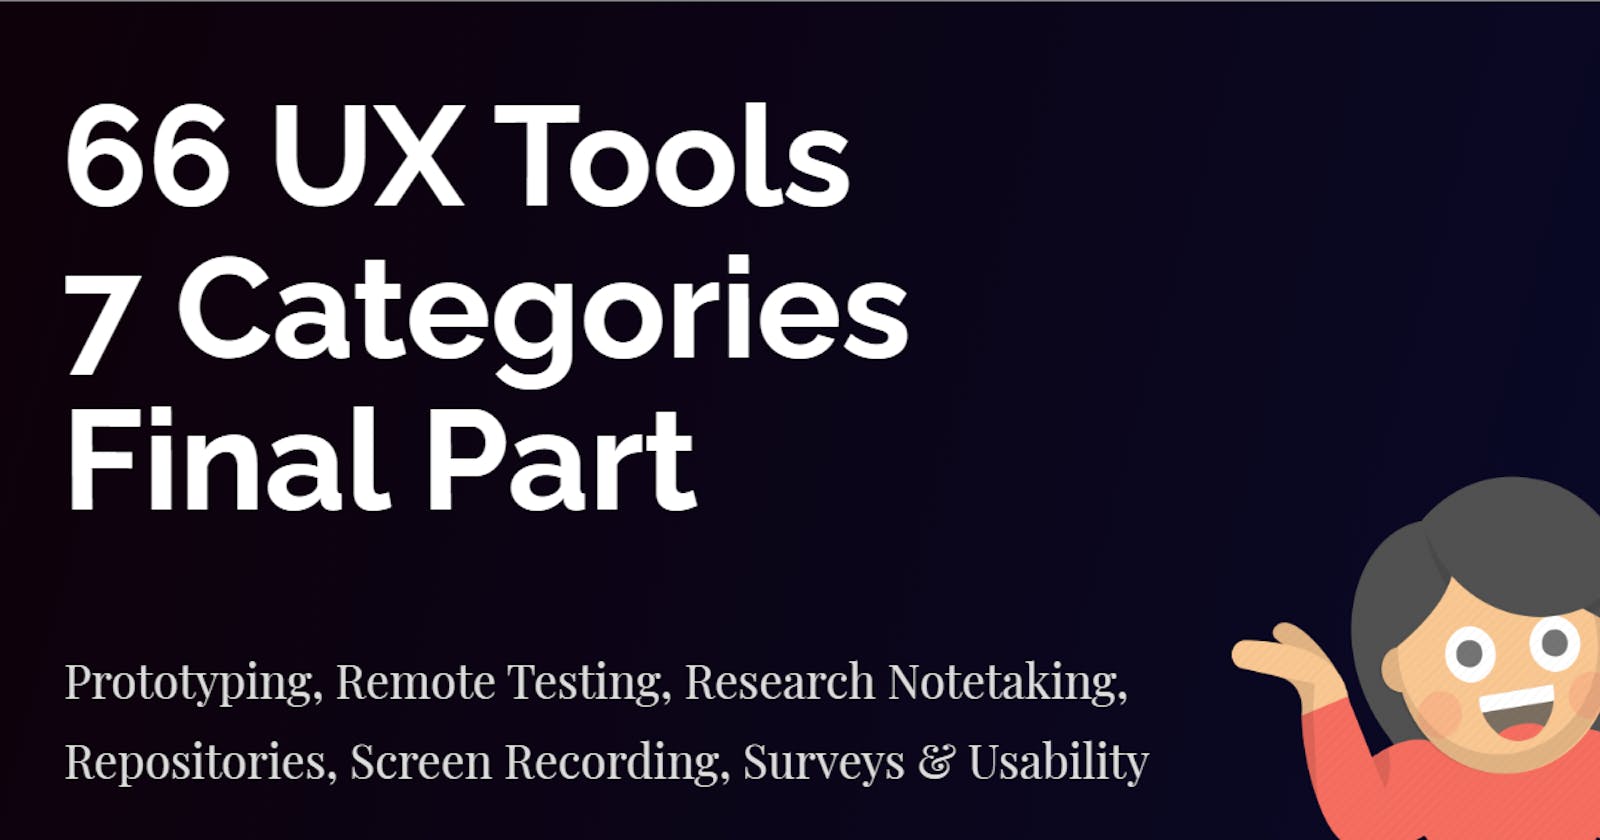 Prototyping, Remote Testing, Research Notetaking, Repositories, Screen Recording, Surveys & Usability tools | UX